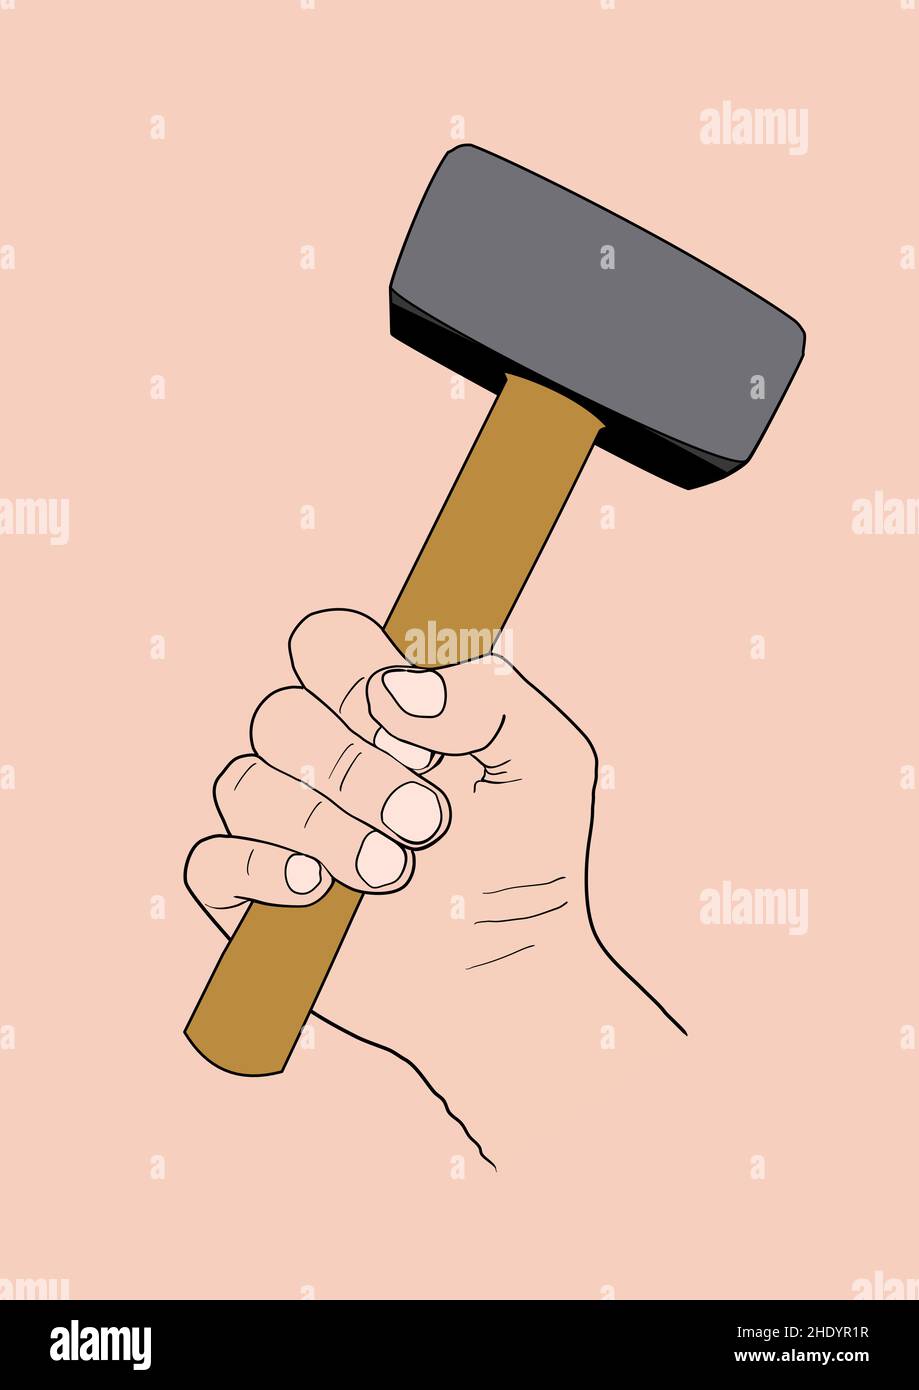 vector drawing of a hand holding a hammer. Plain background Stock Vector